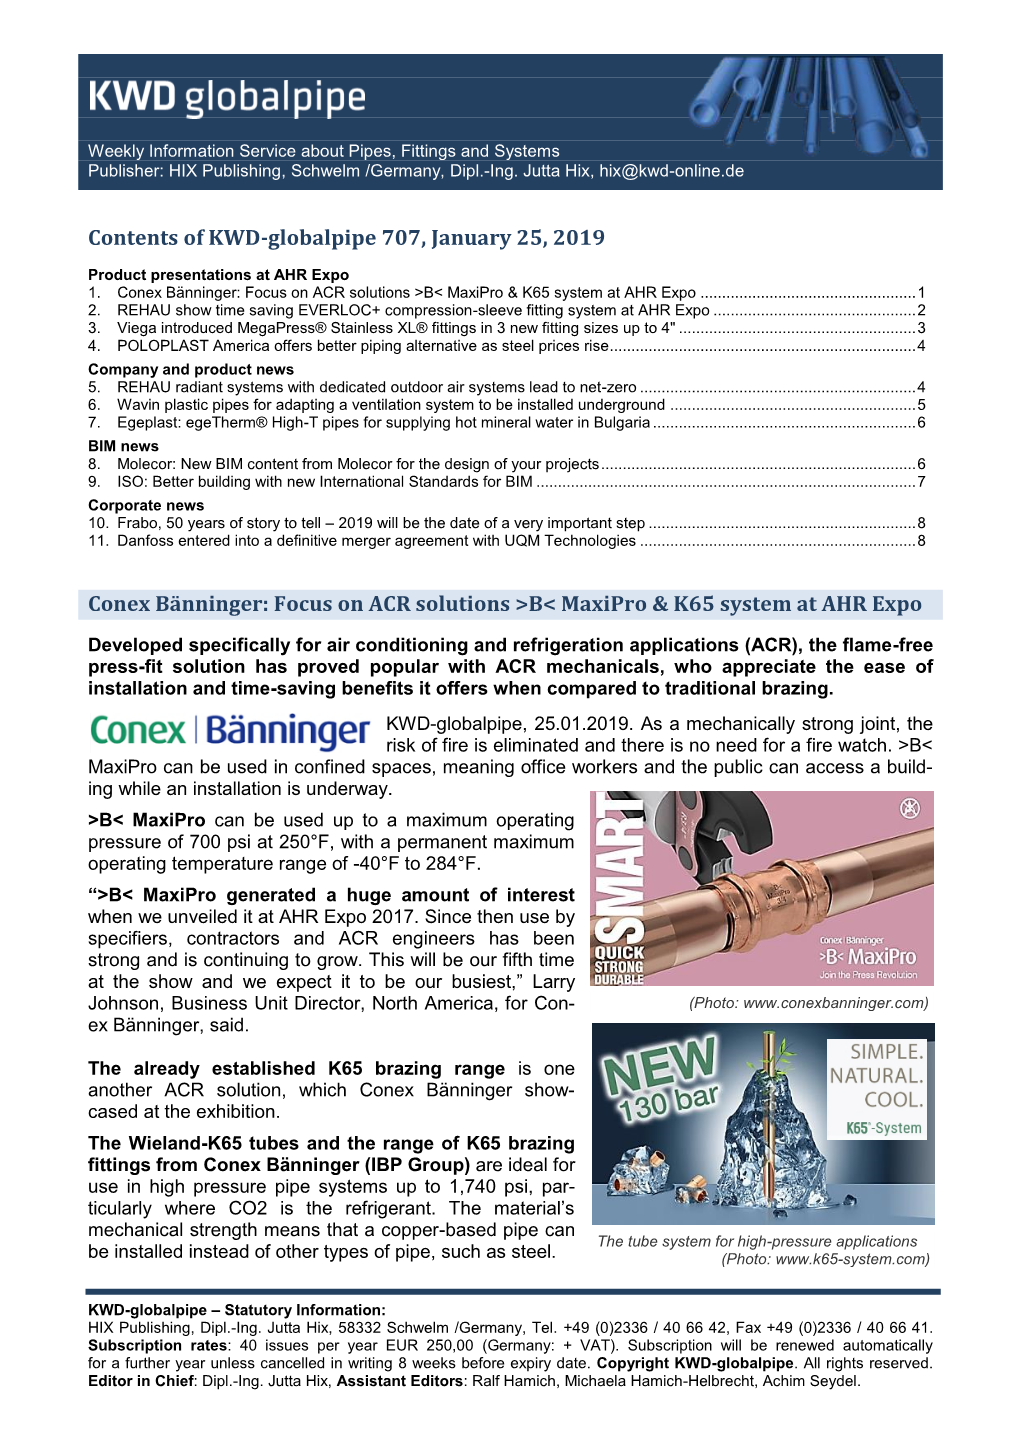 Contents of KWD-Globalpipe 707, January 25, 2019 Conex